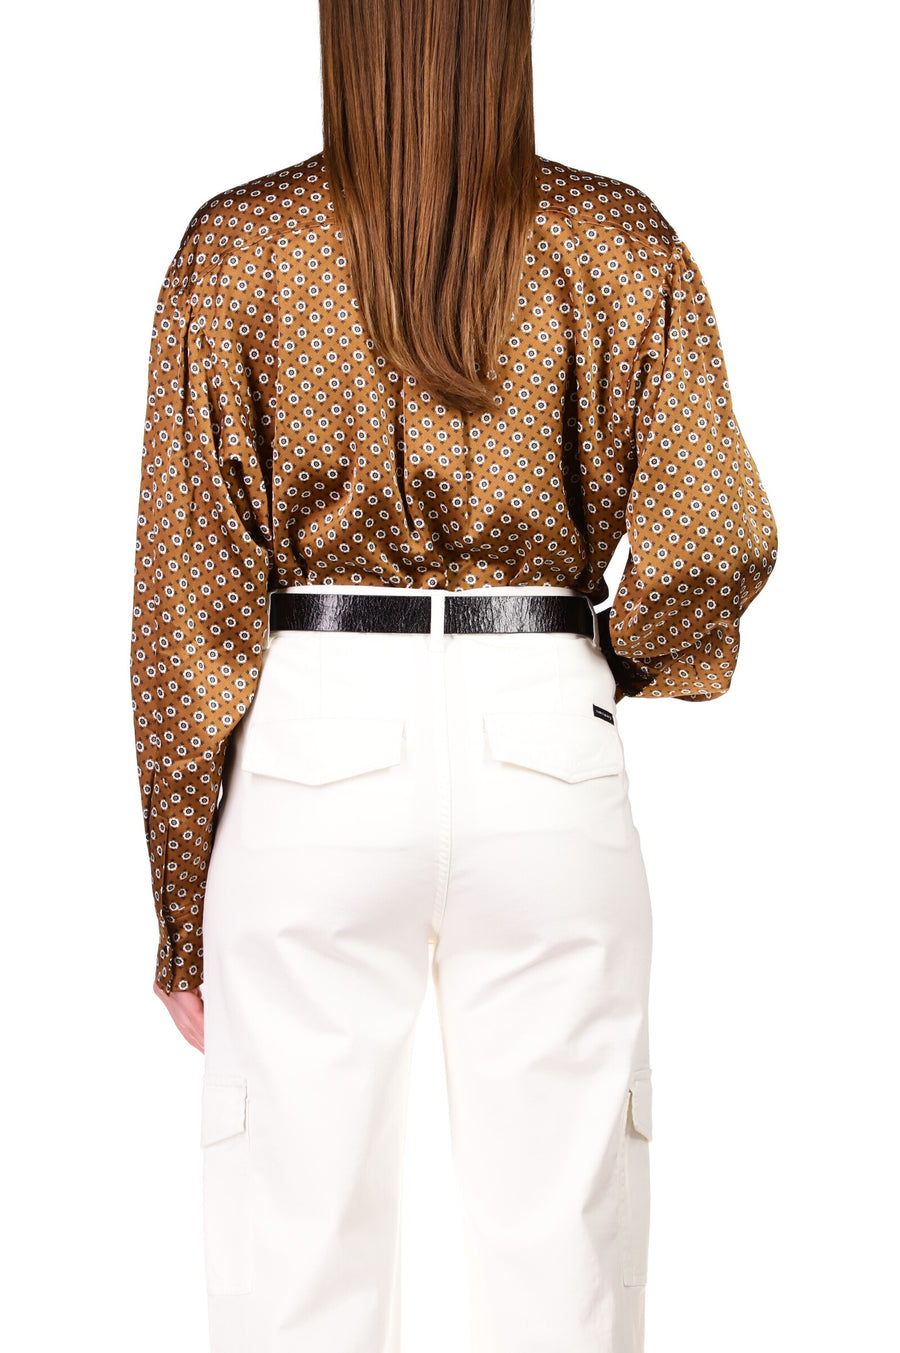 Relaxed Modern Blouse